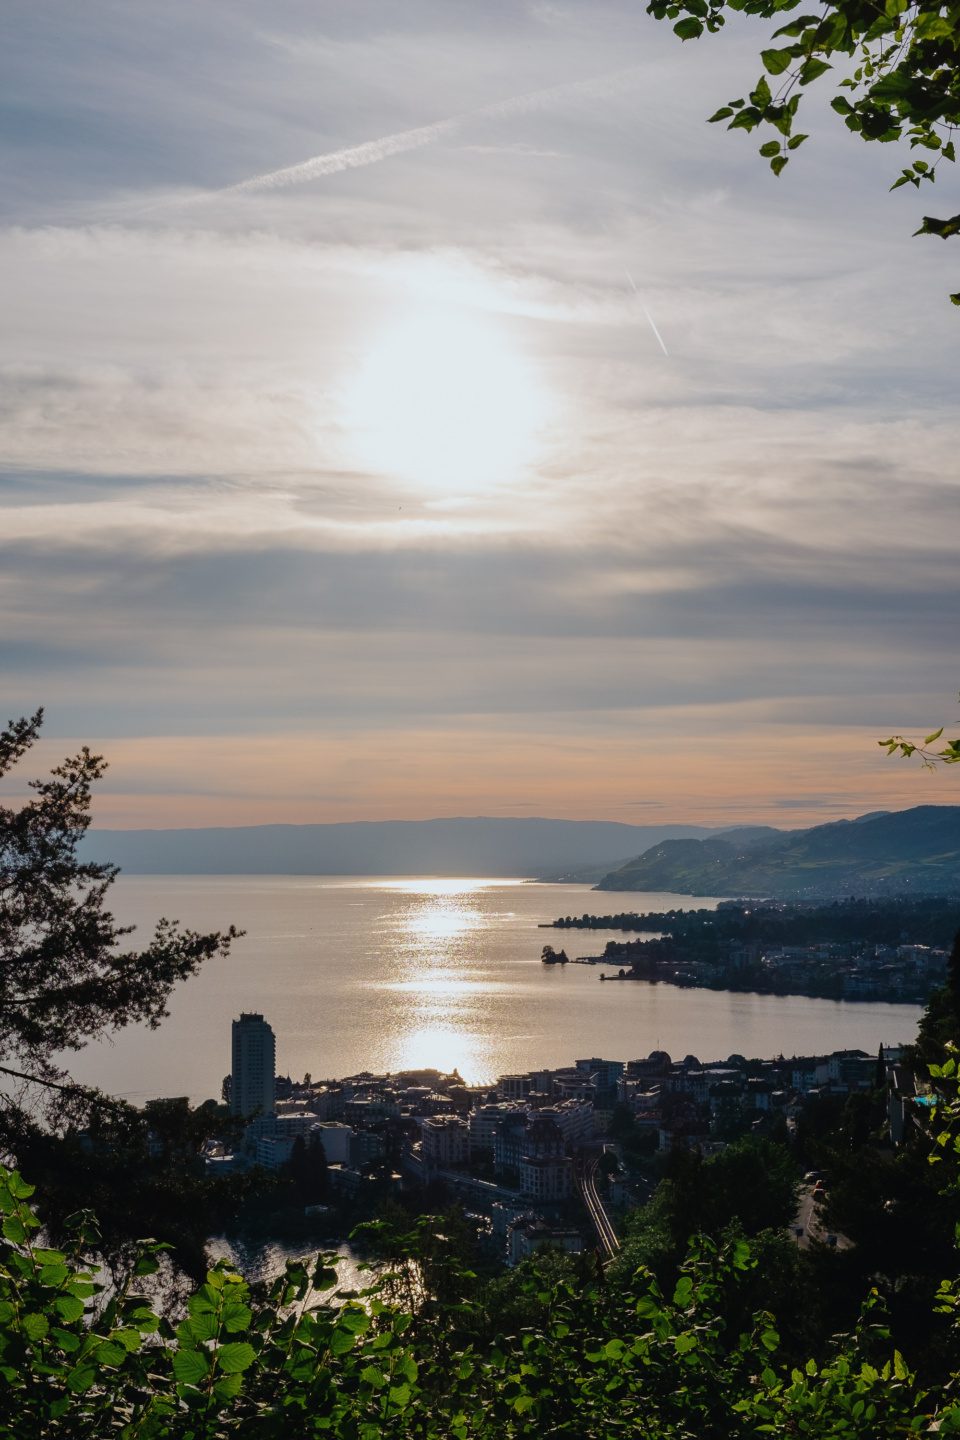 Montreux and Lake Geneva in captivating counterlight